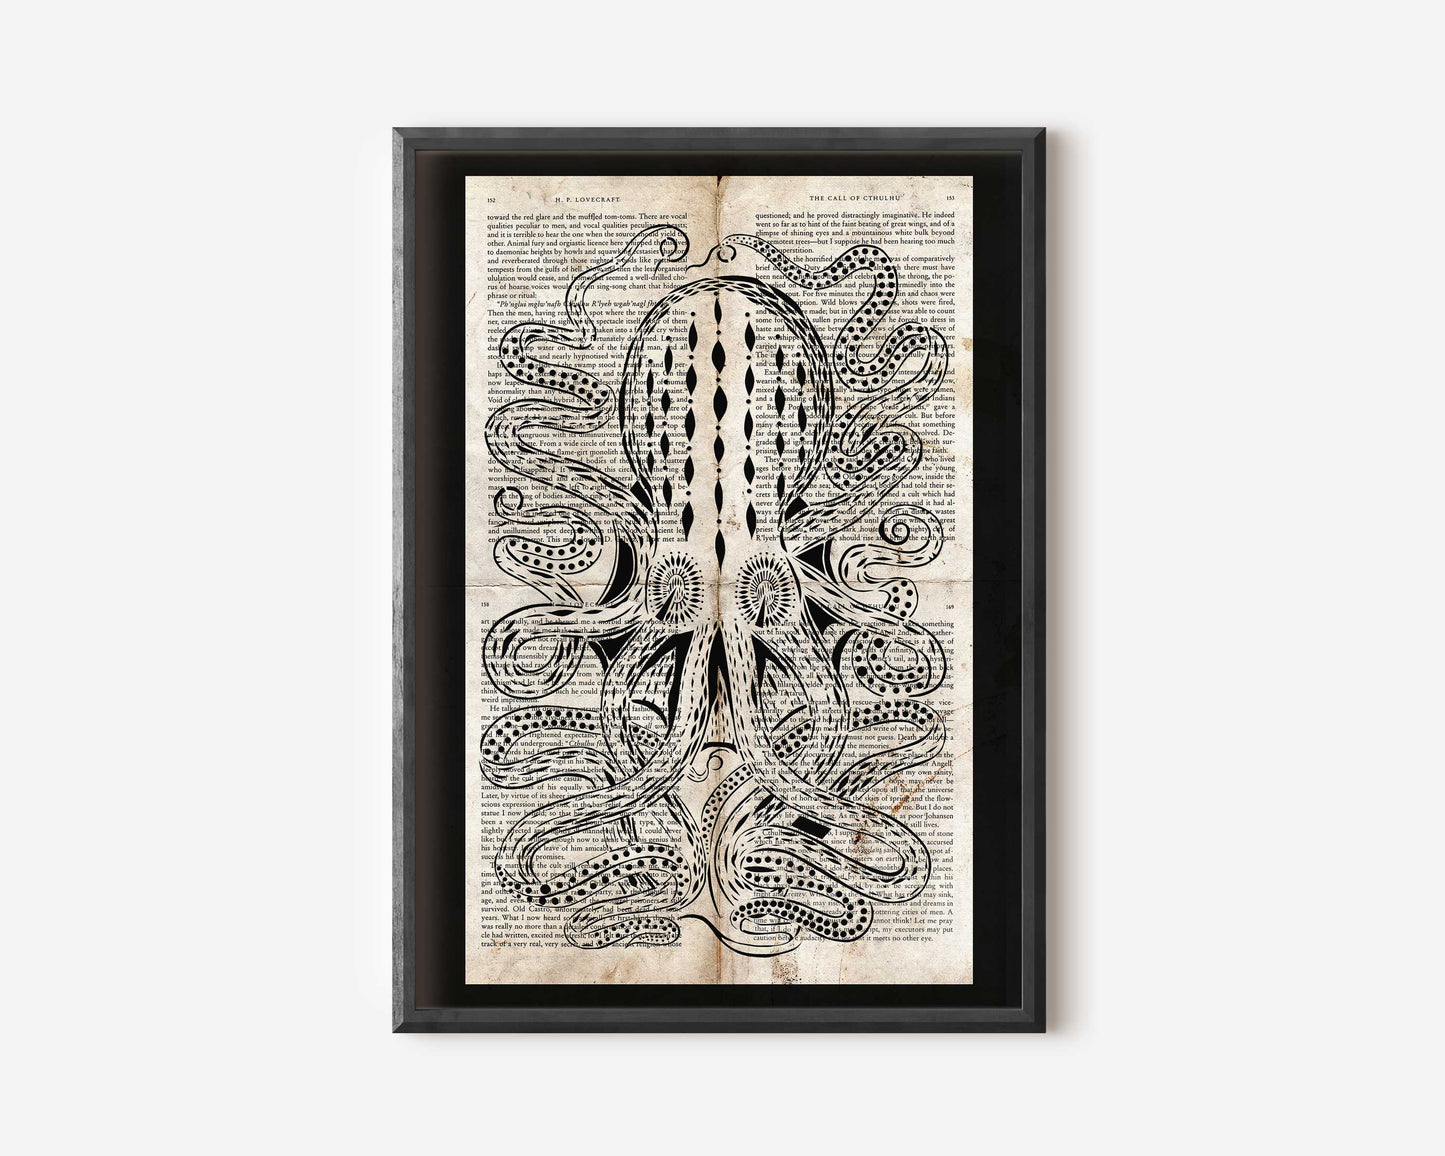 Lovecraft, The Call of Cthulhu Grunge Edition Wall Art Poster